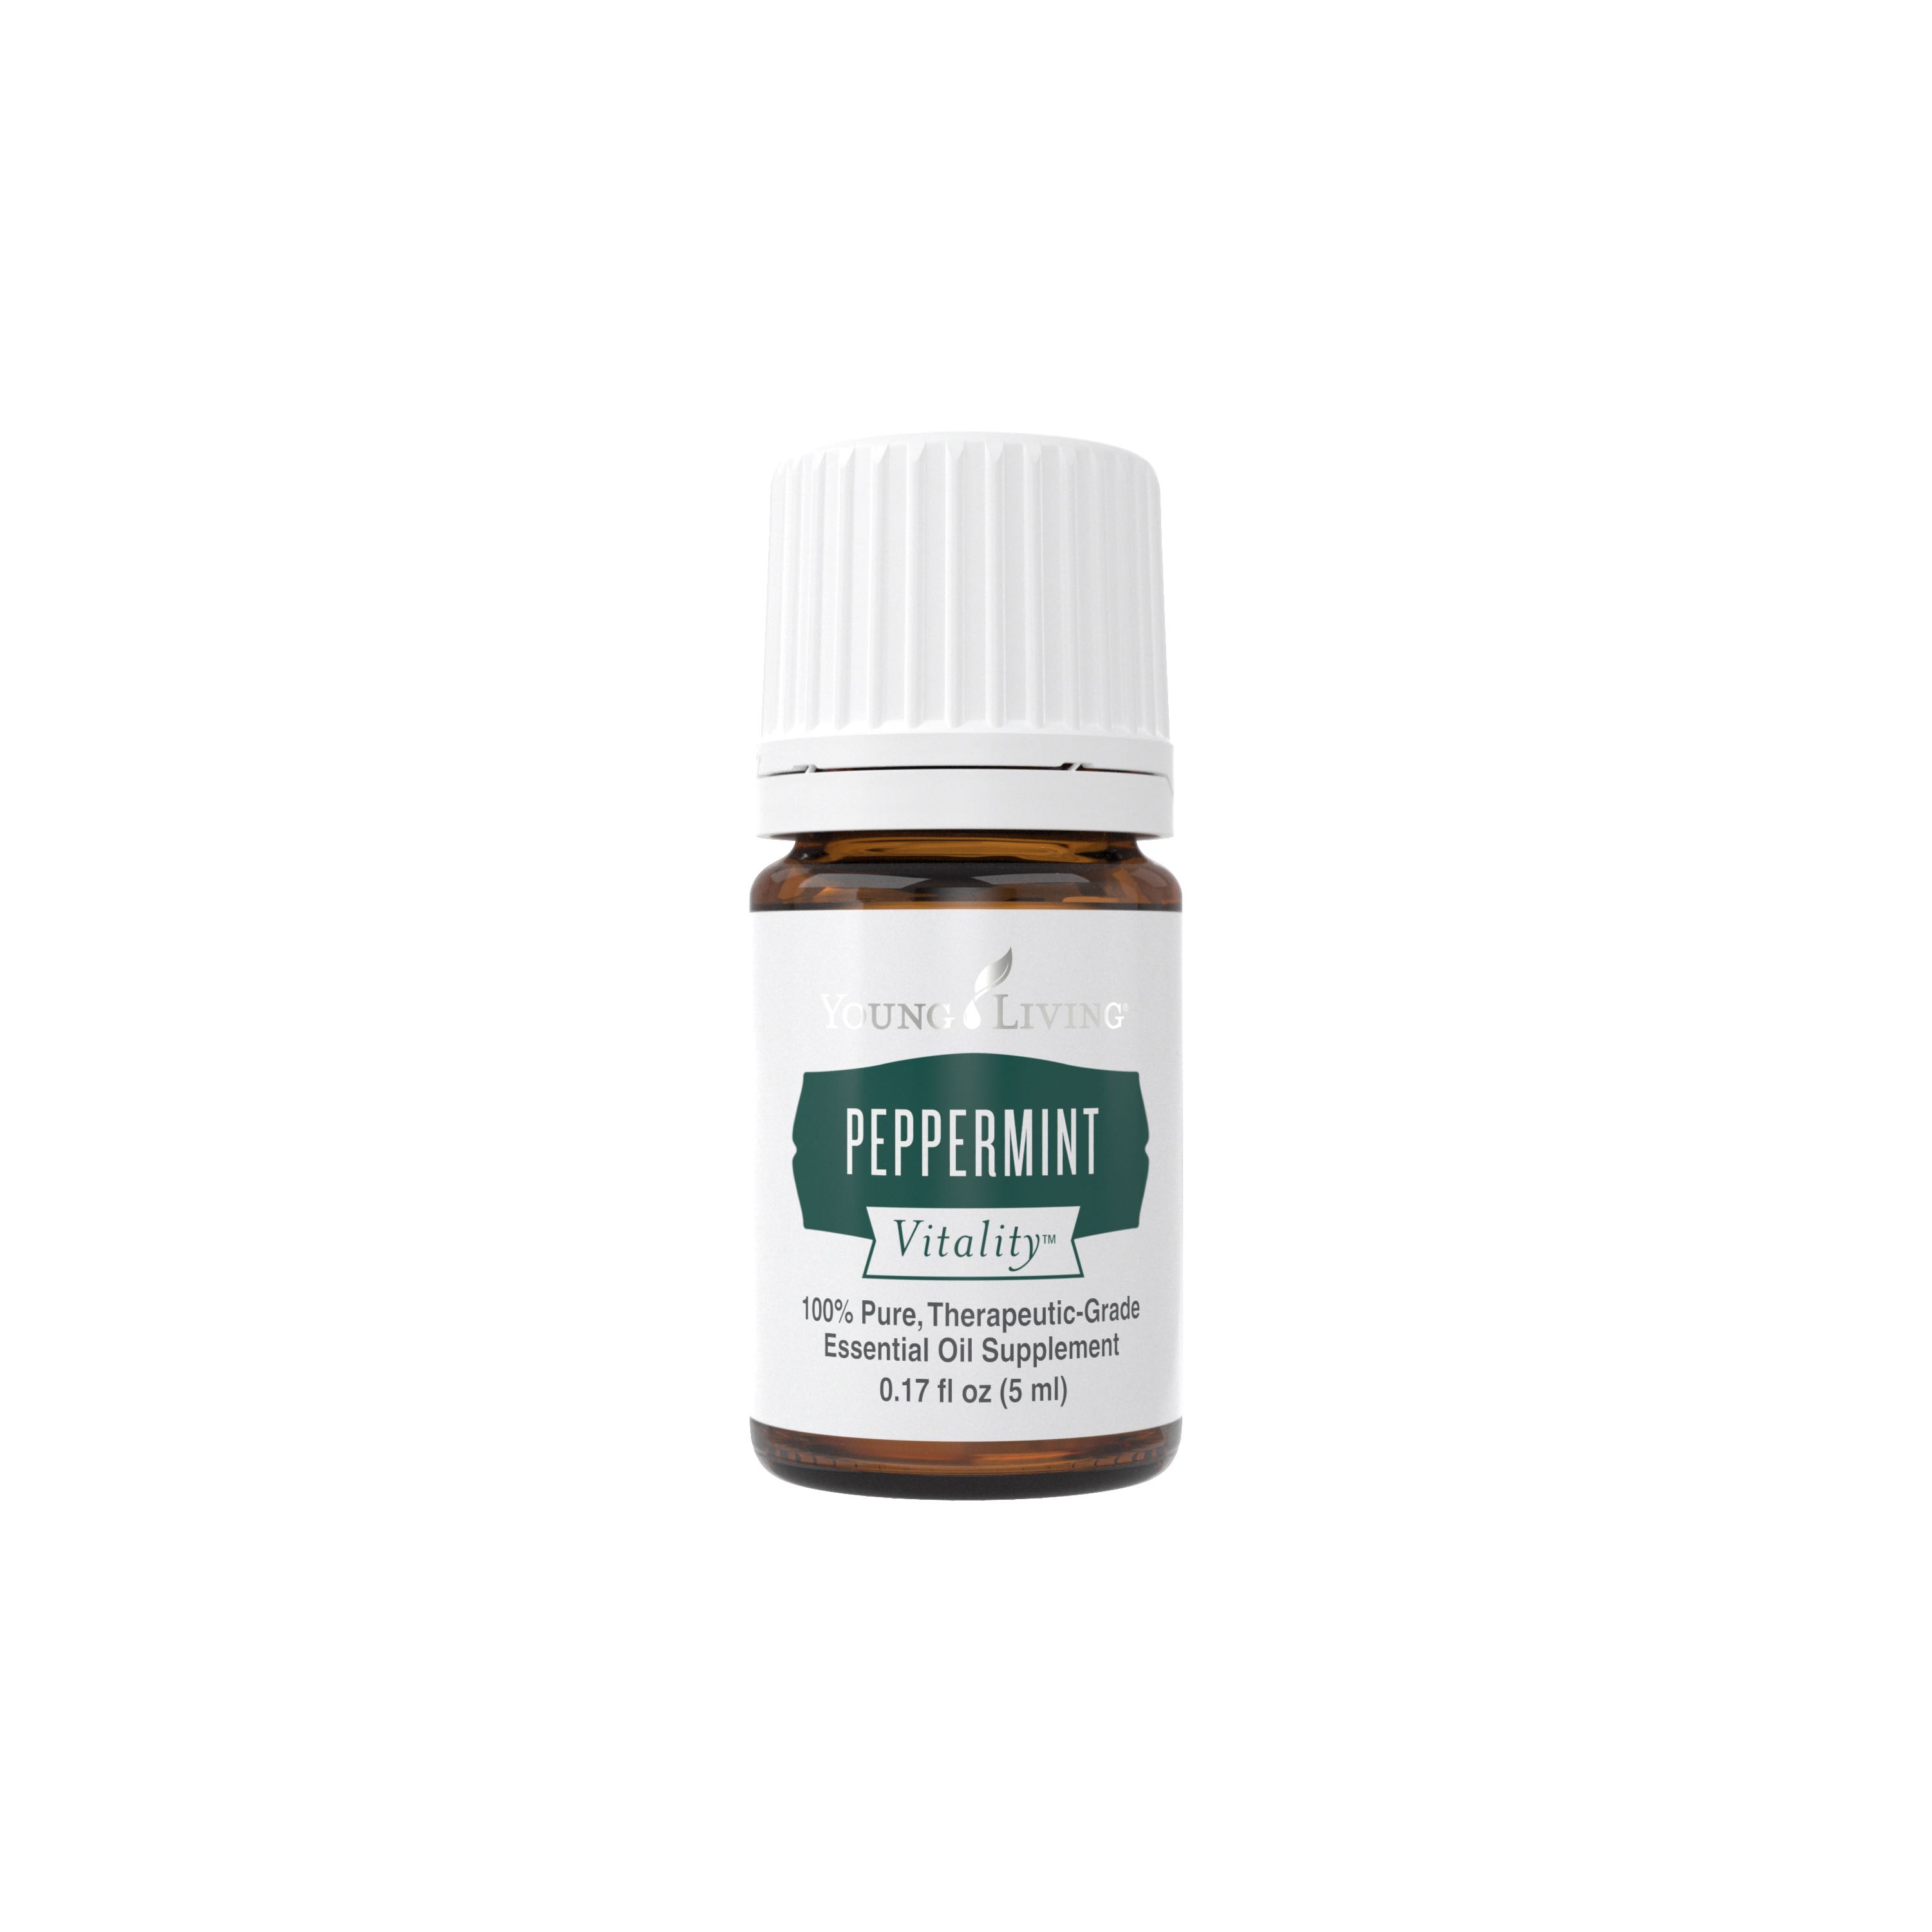 Peppermint increases energy, relieves nausea, improves concentration, clarity & focus